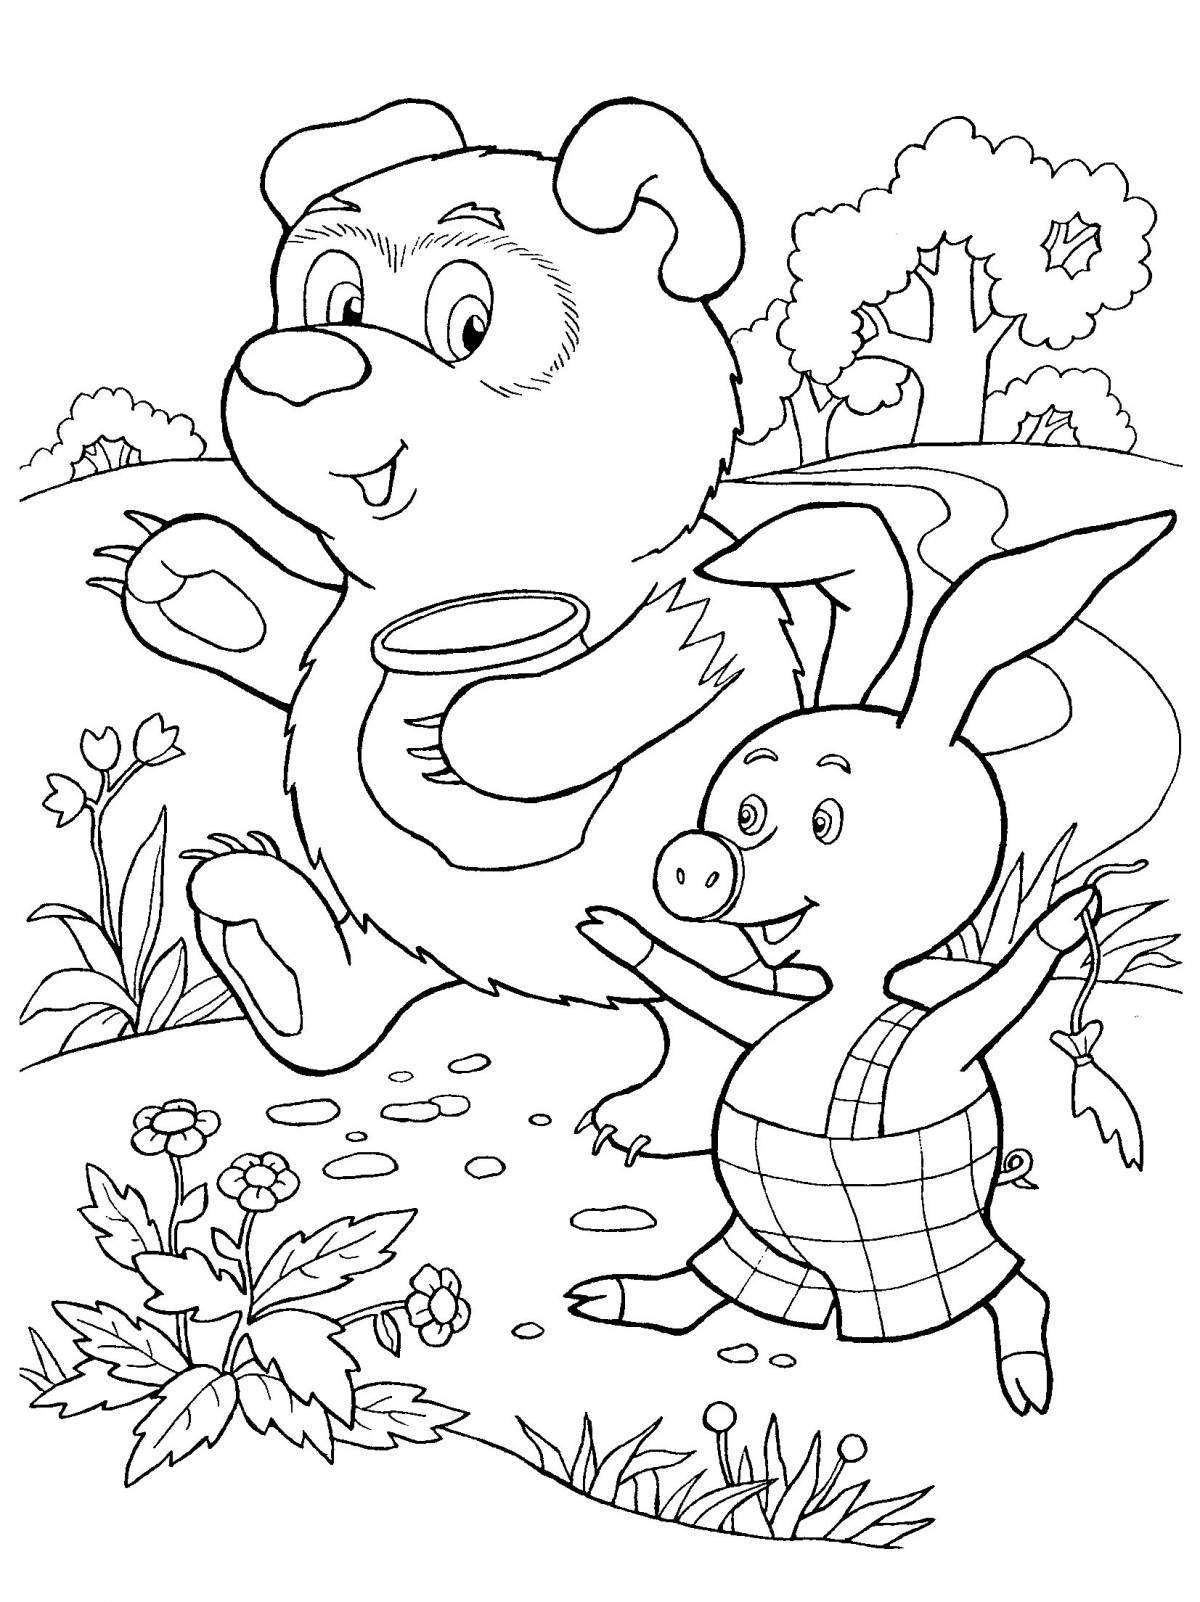 Perfect coloring page good image quality